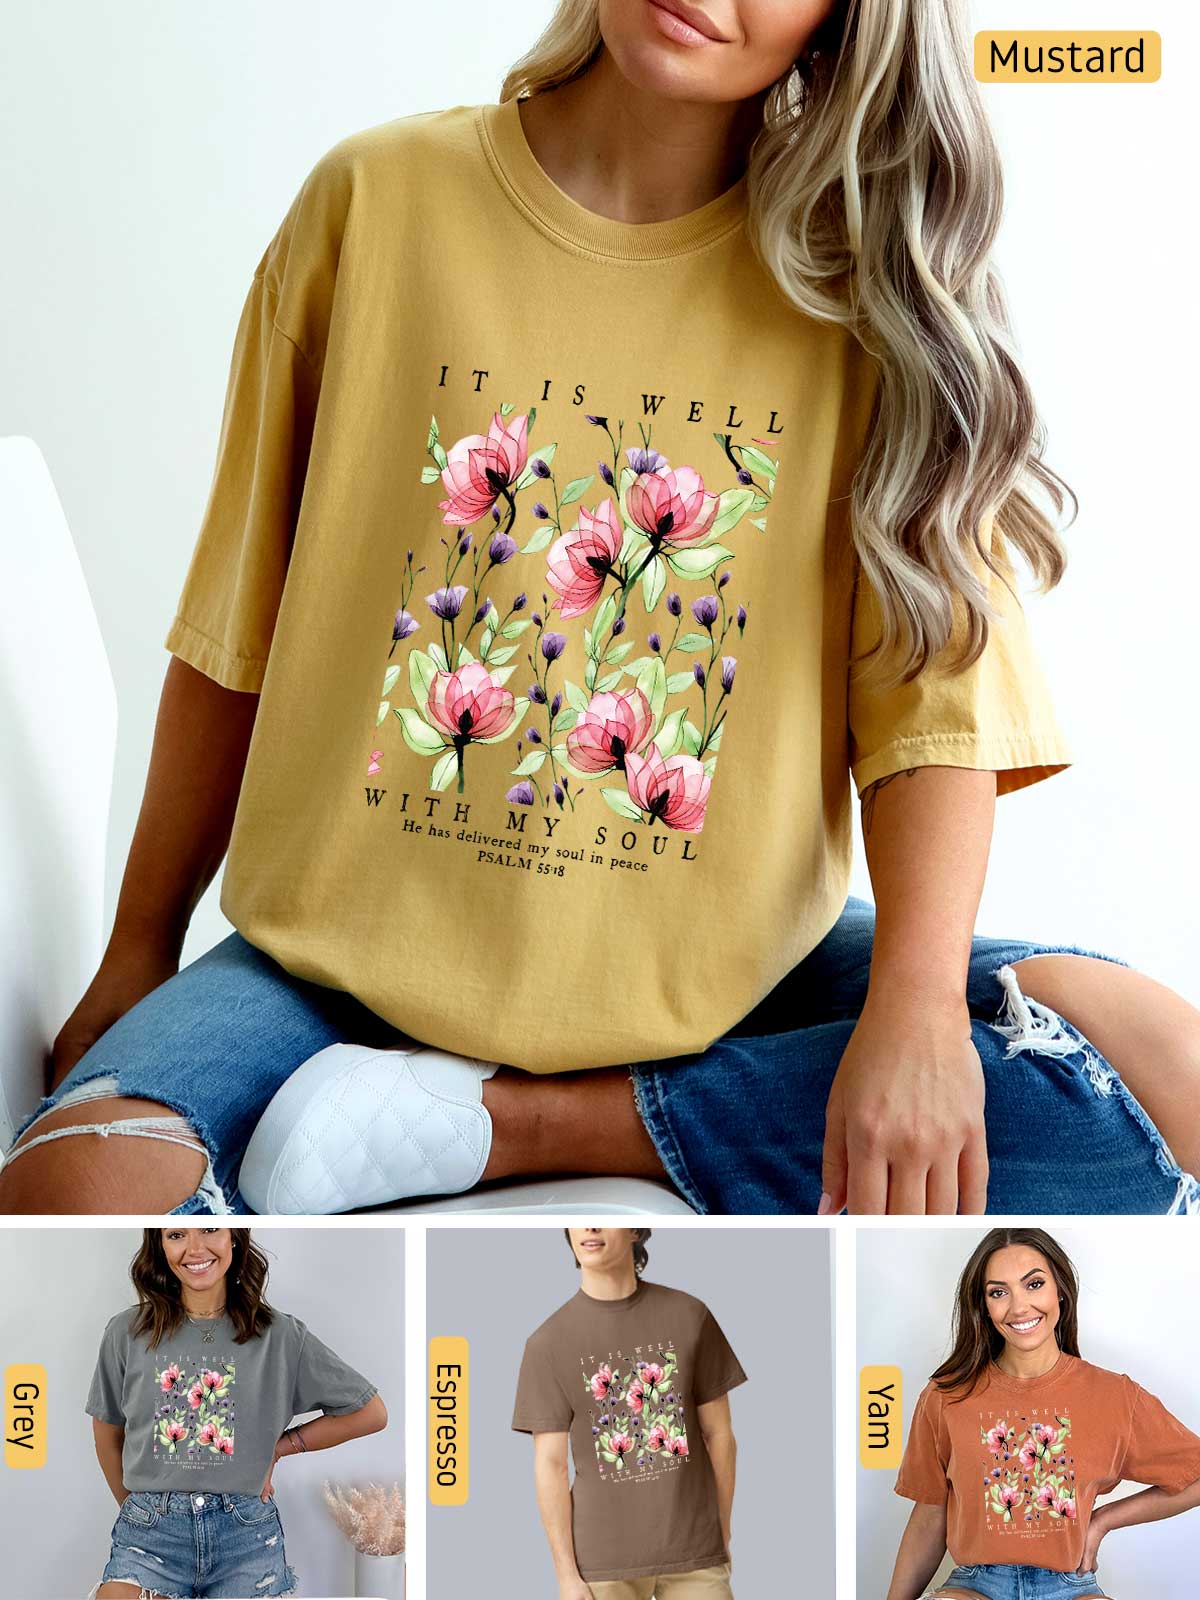 a woman wearing a mustard colored t - shirt with flowers on it